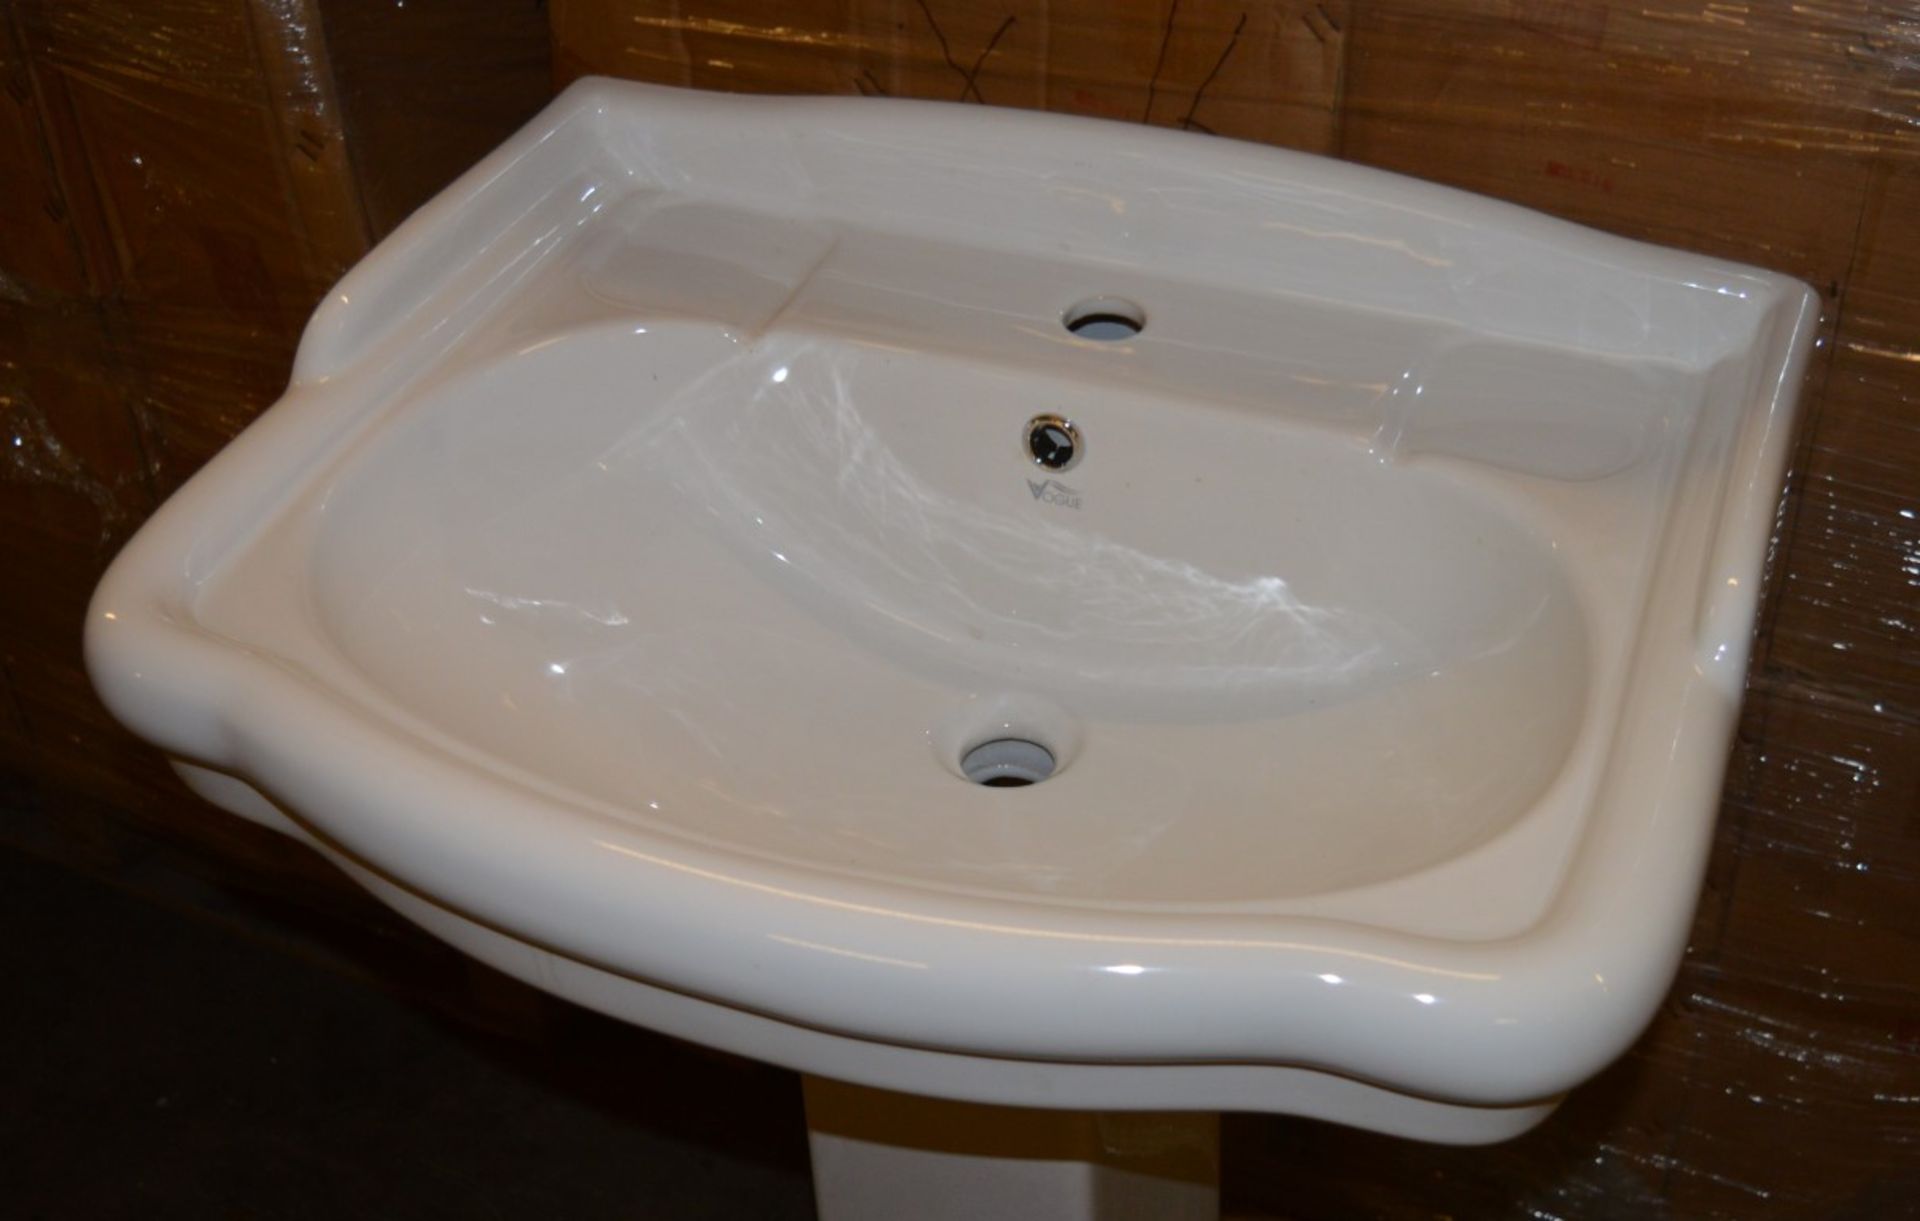 20 x Vogue Bathrooms ARTISIAN Two Tap Hole SINK BASINS With Pedestals - 600mm Width - Brand New - Image 3 of 3